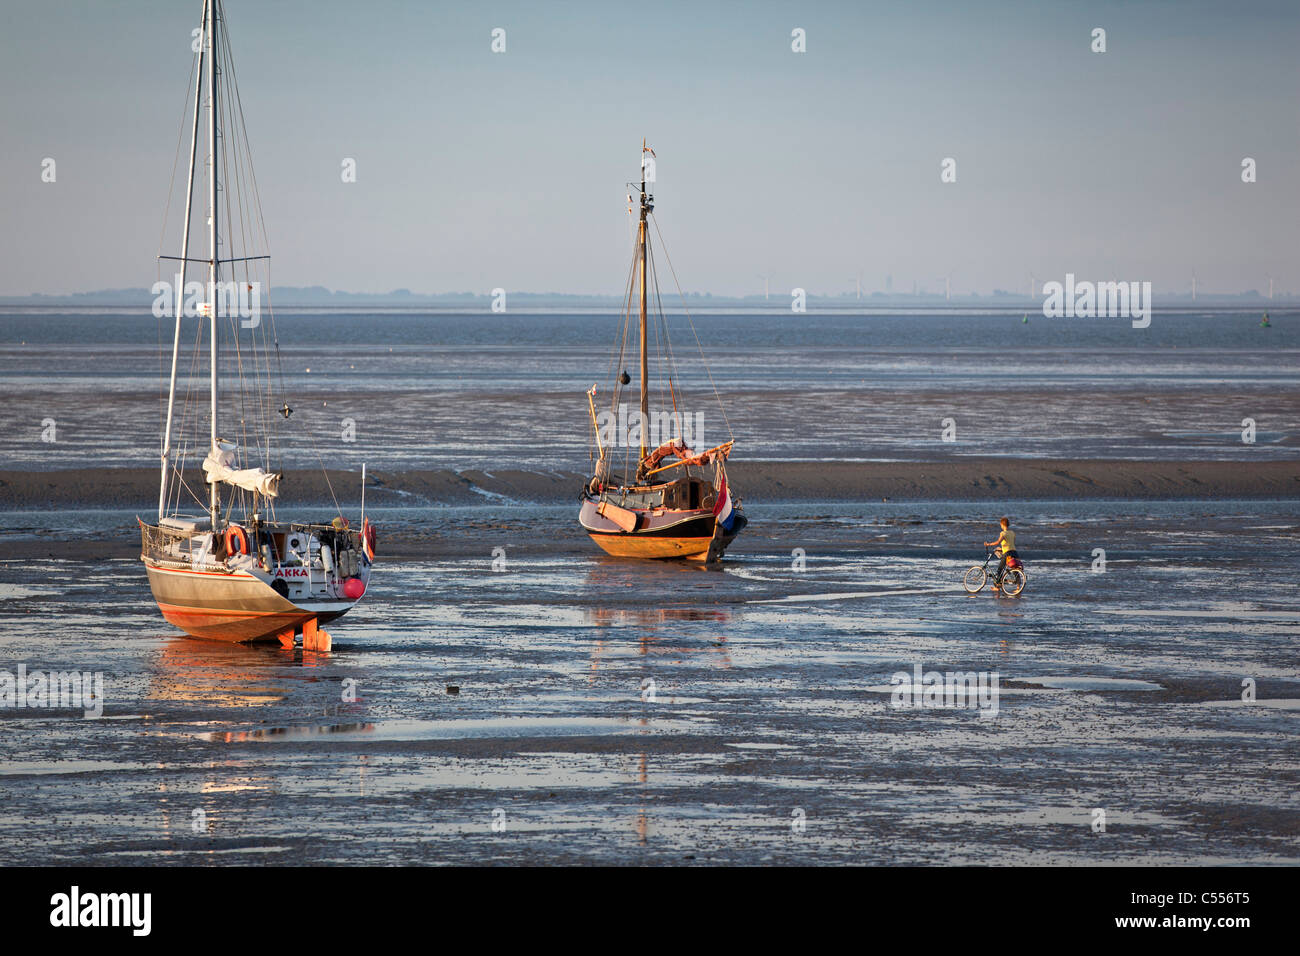 The Netherlands, Nes, Ameland Island, belonging to Wadden Sea Islands. Sailing boats on mud flat in harbour. Woman and bicycle. Stock Photo